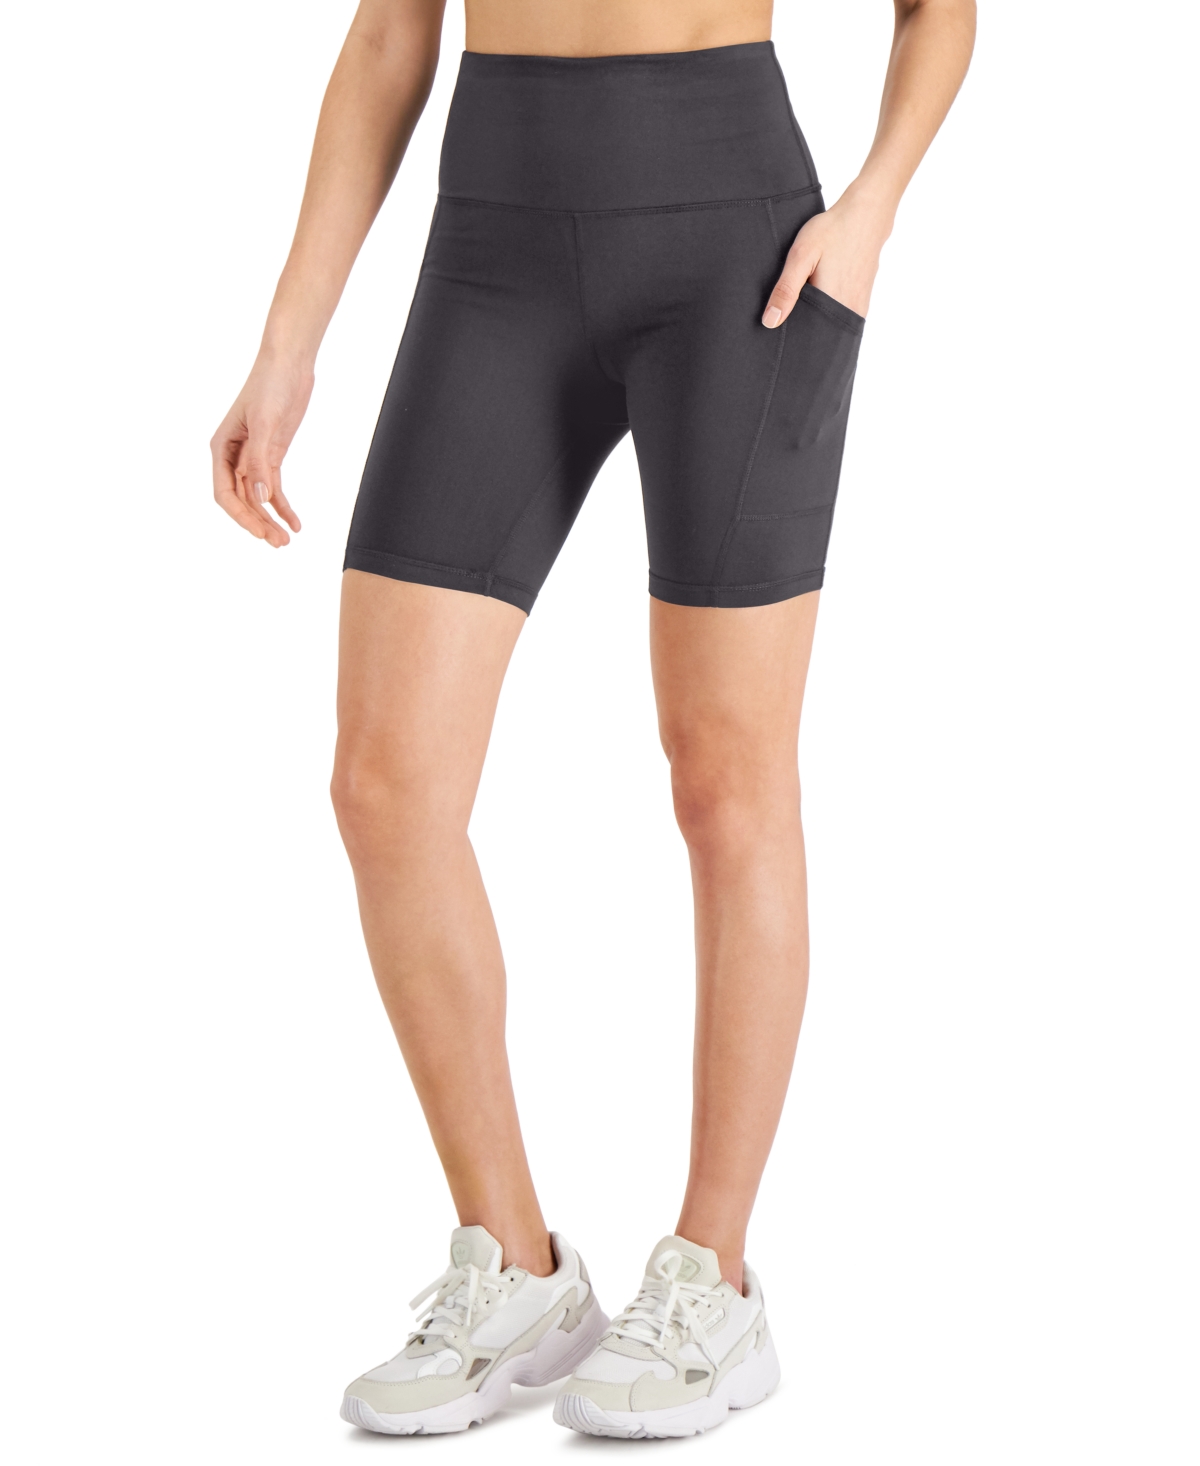 Women's Compression 7" Bike Shorts, Created for Macy's - Deep Charcoal